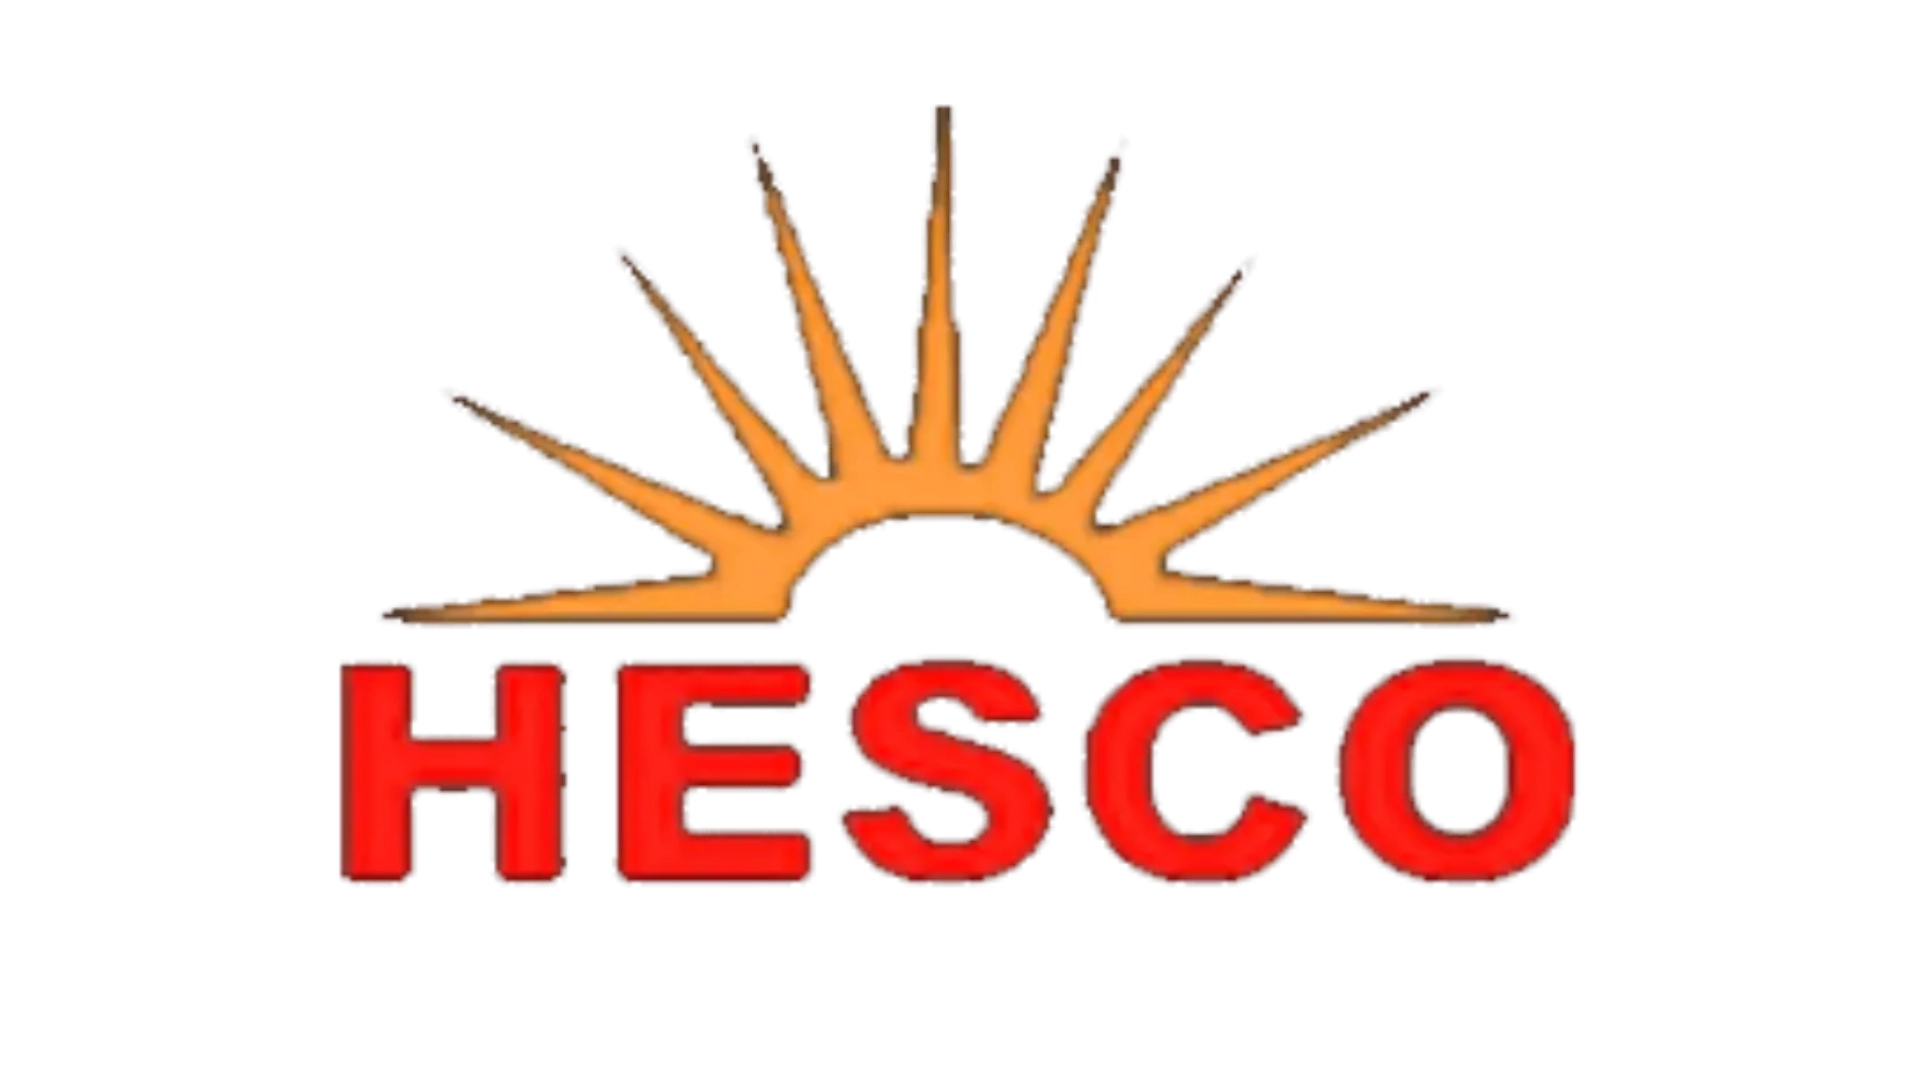 About HESCO